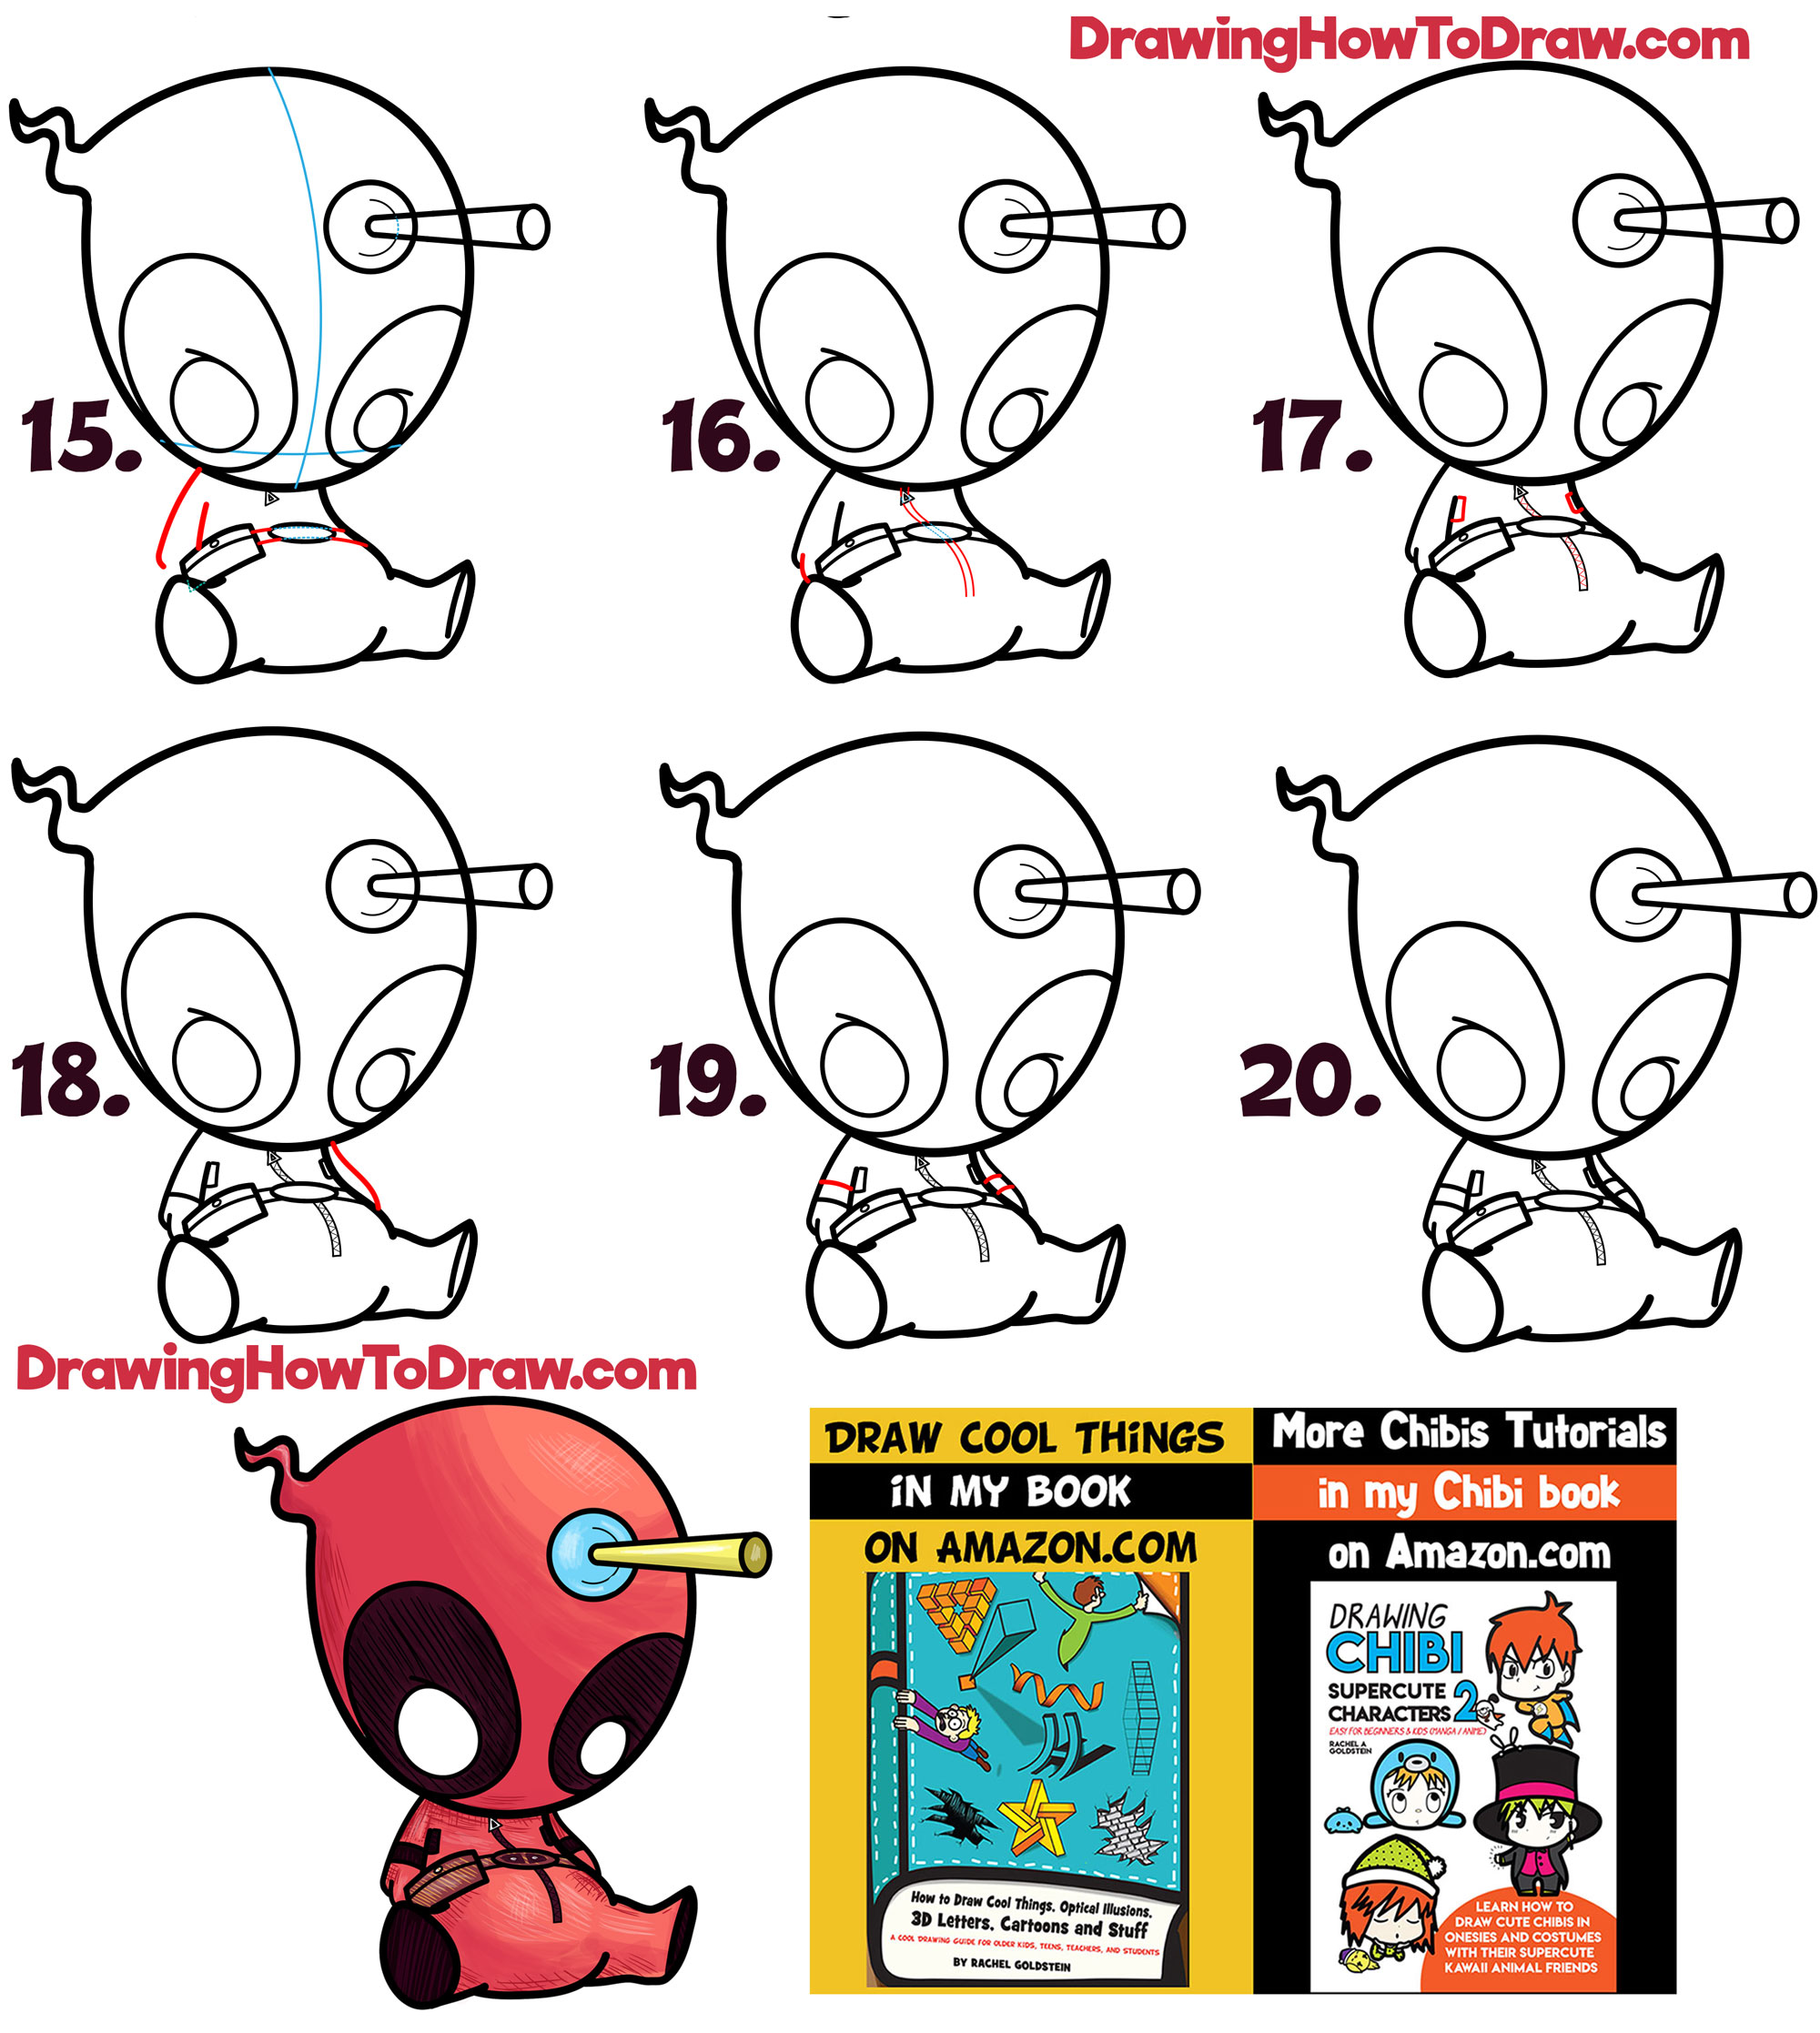 Learn How to Draw Cute Cartoon / Chibi Deadpool Simple Steps Drawing Lesson for Beginners